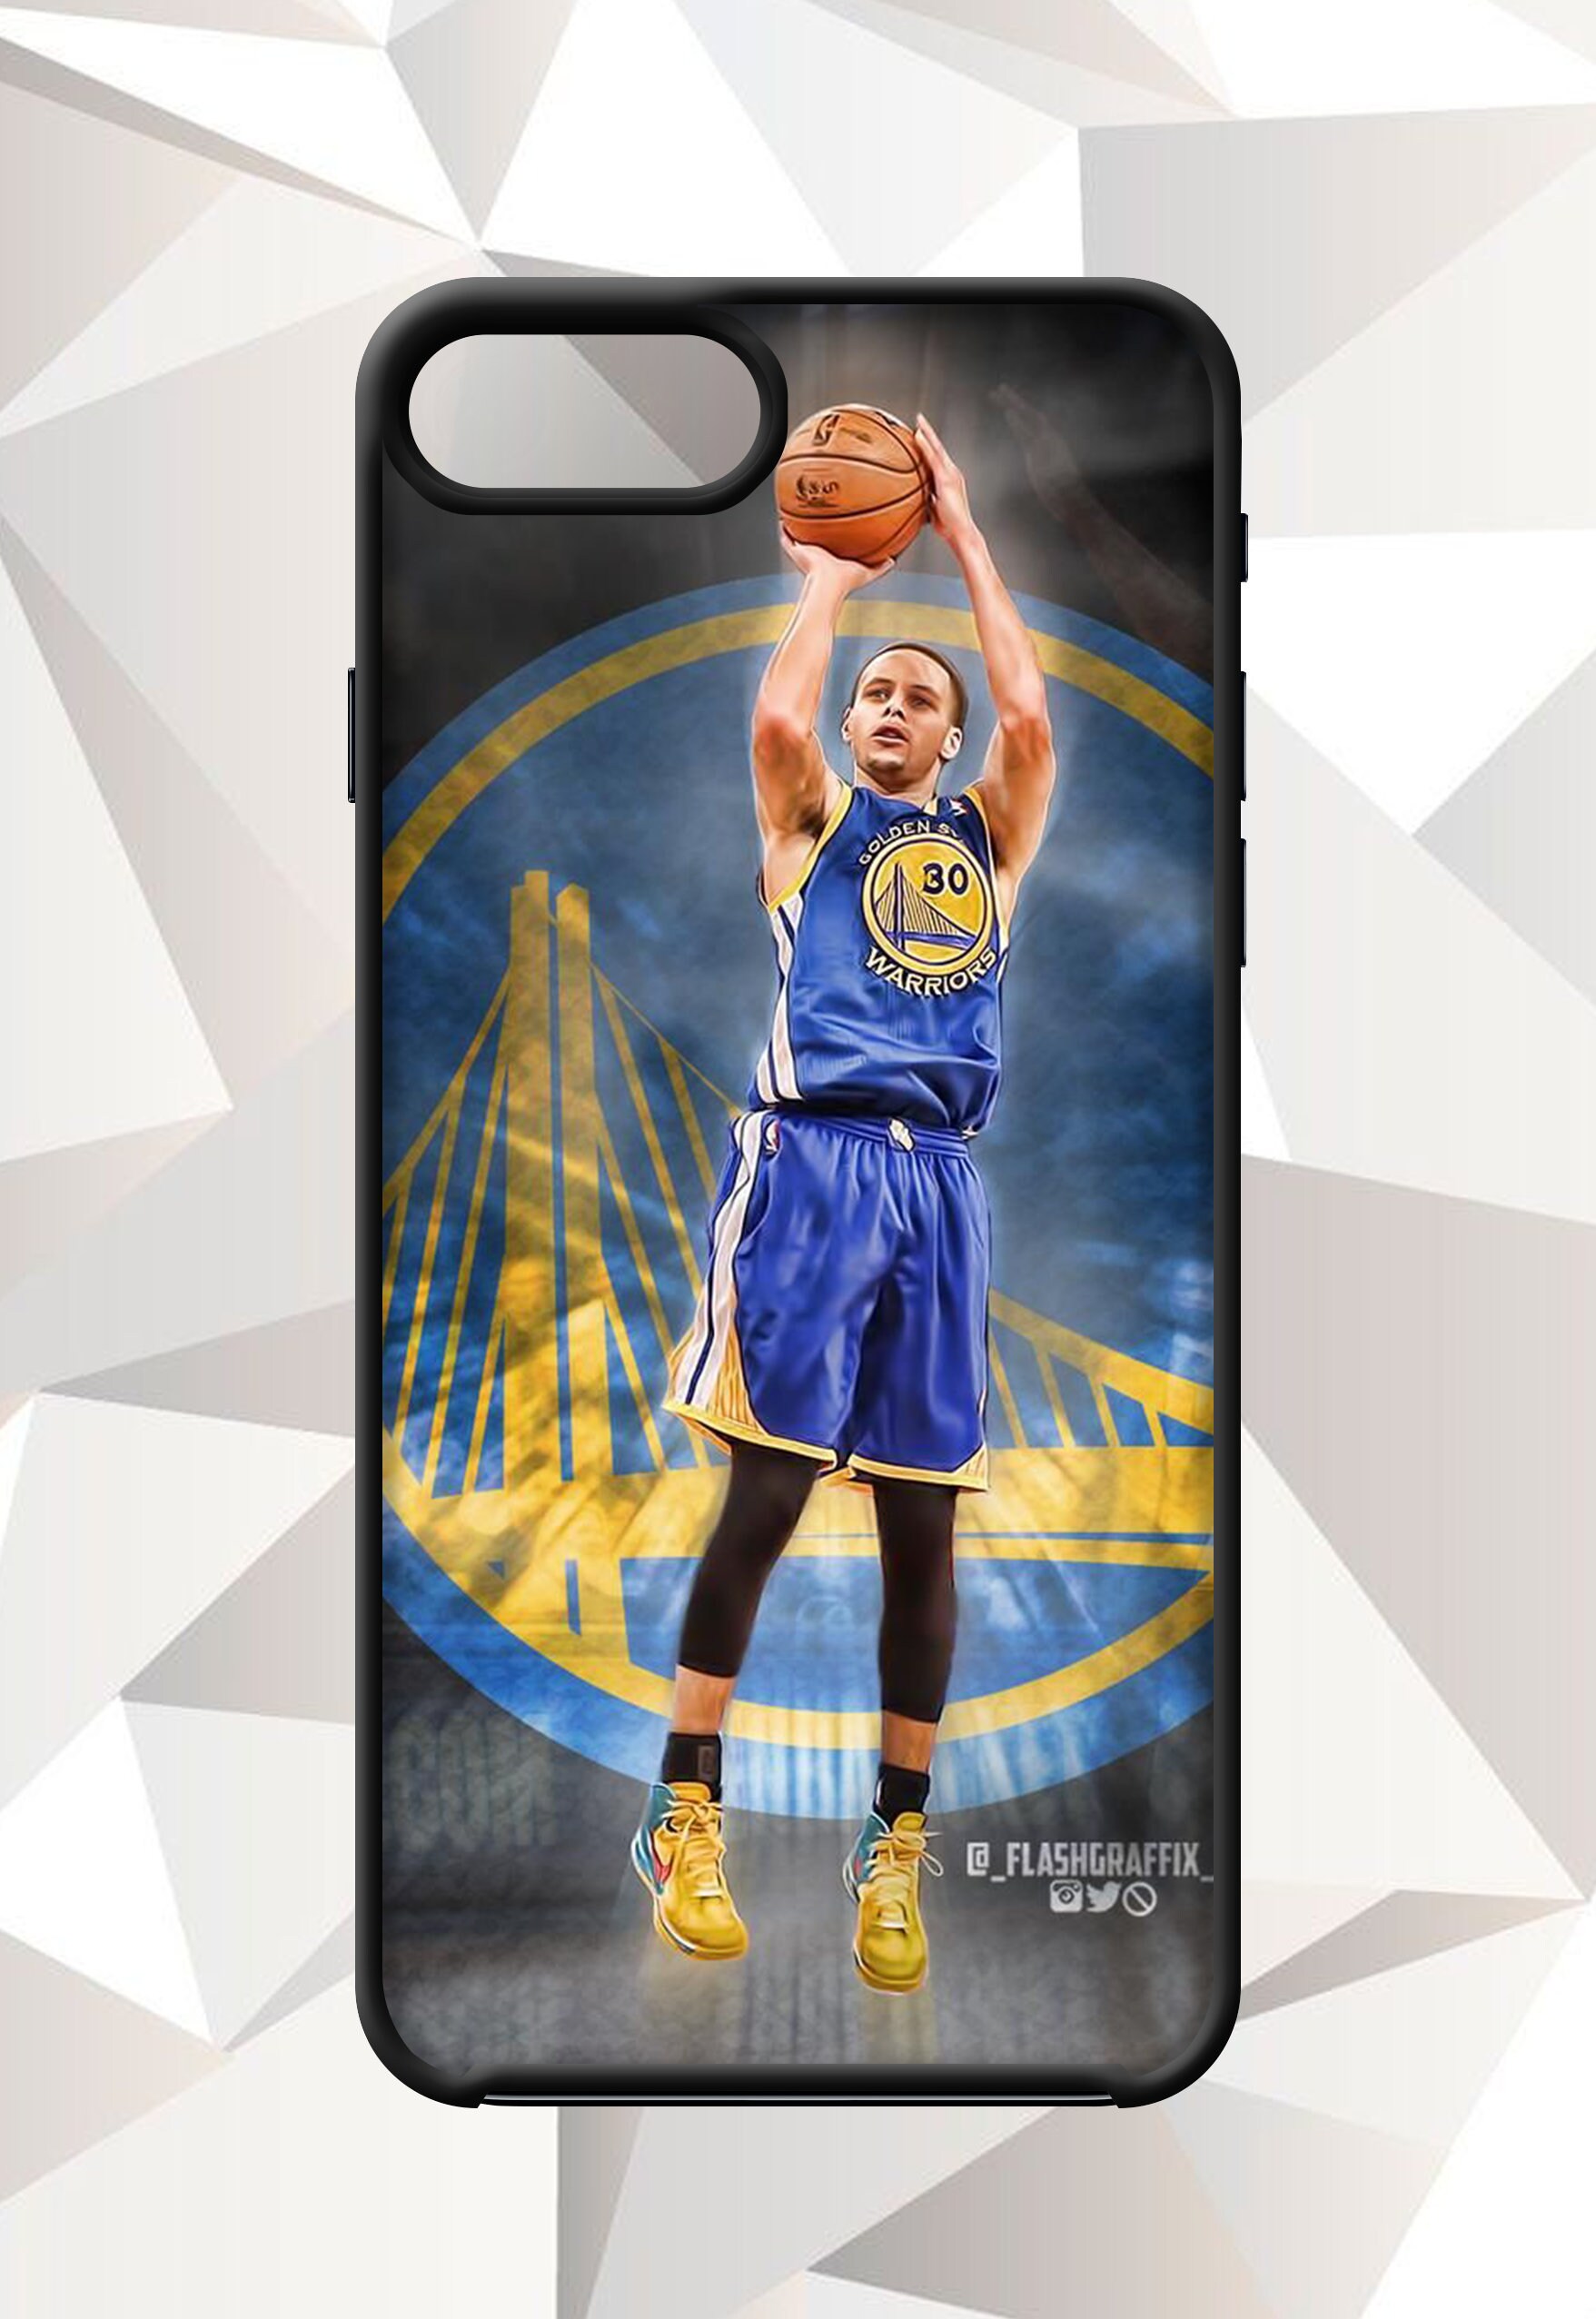 GOLDEN STATE WARRIORS BASKETBALL NBA iPhone X / XS Case Cover